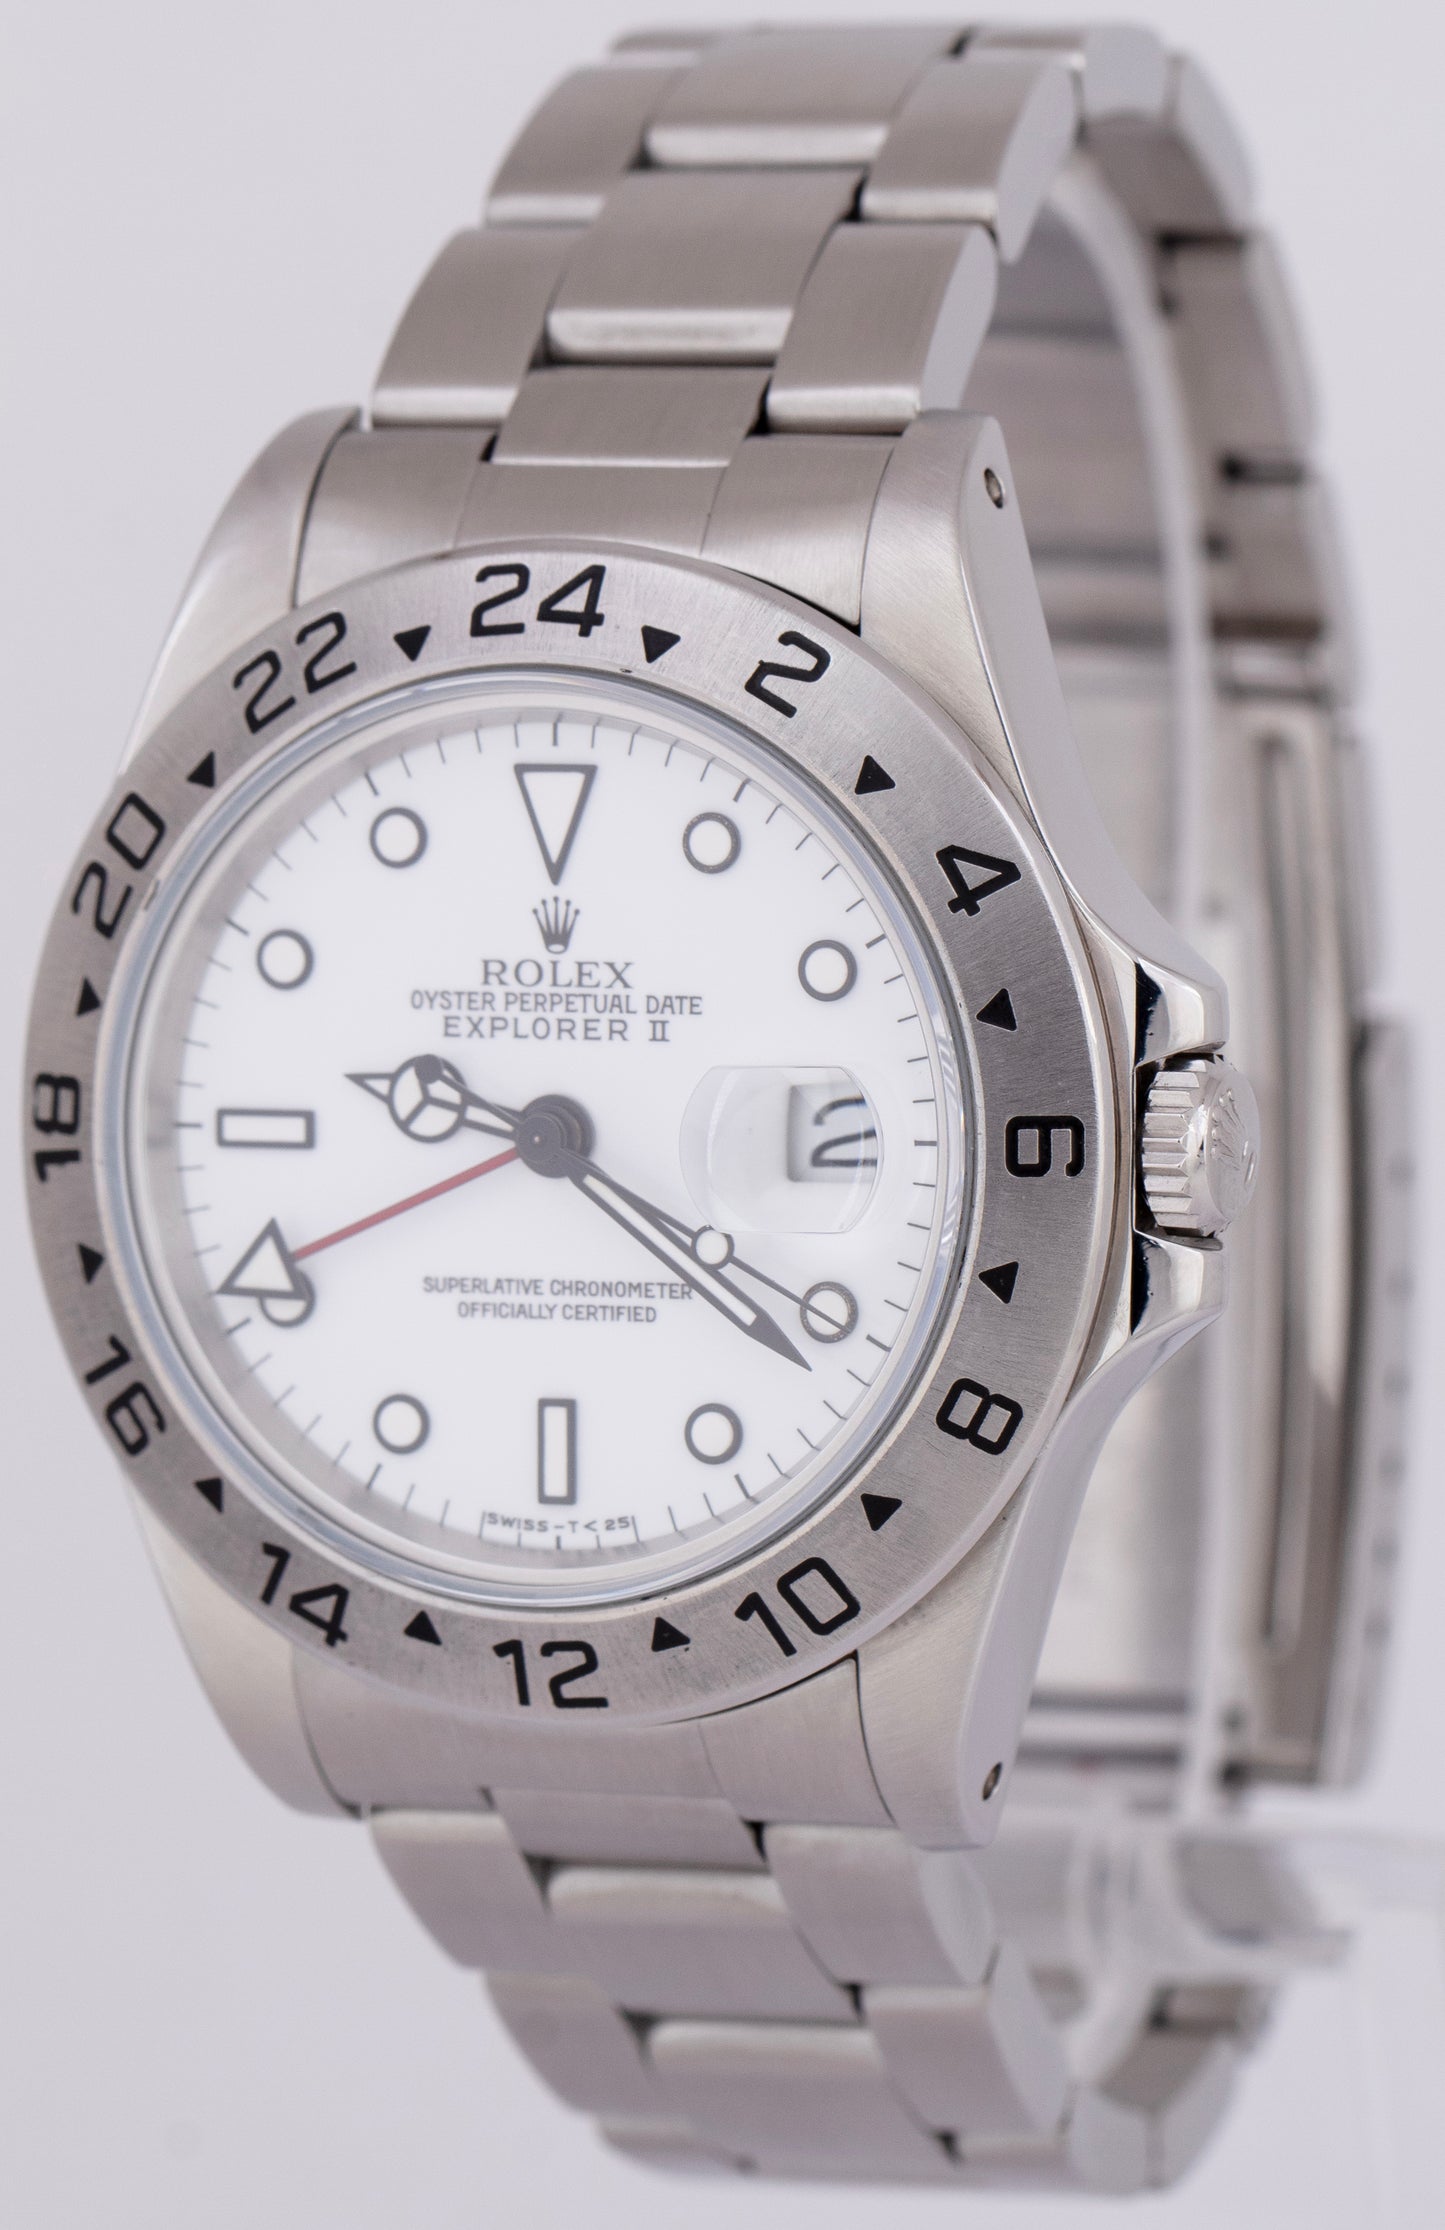 Rolex Explorer II White Stainless Steel 40mm Stainless Steel GMT Watch 16570